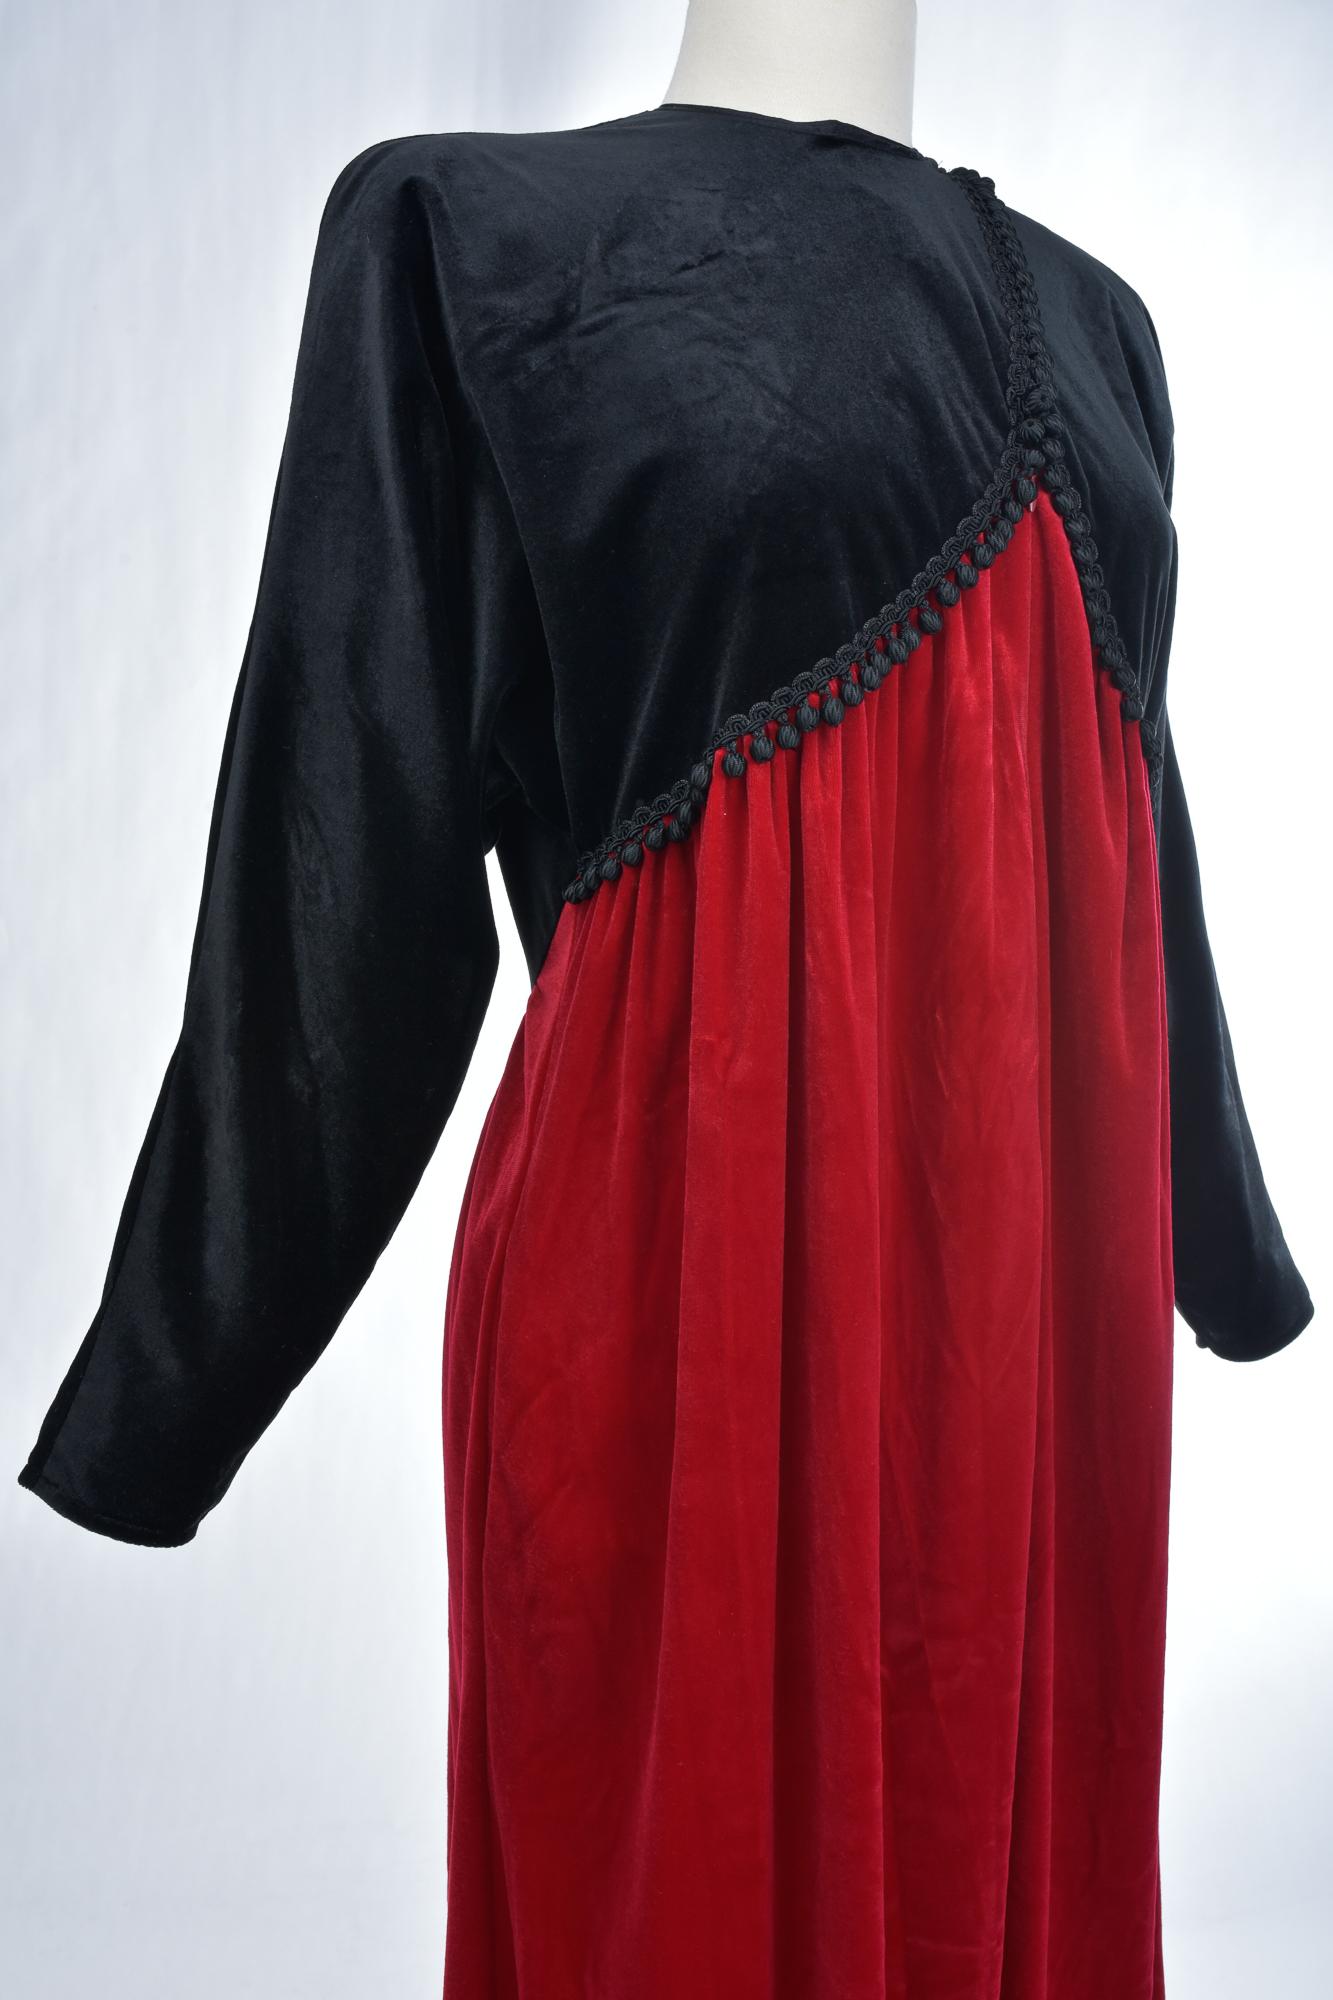 Circa 1990

United States

Beautiful evening or interior dress in black and crimson red velvet by the famous American designer Oscar de la Renta and dating from the 1990s. Obvious wink to the Hispanic culture! Loose fit with high waist pleated under